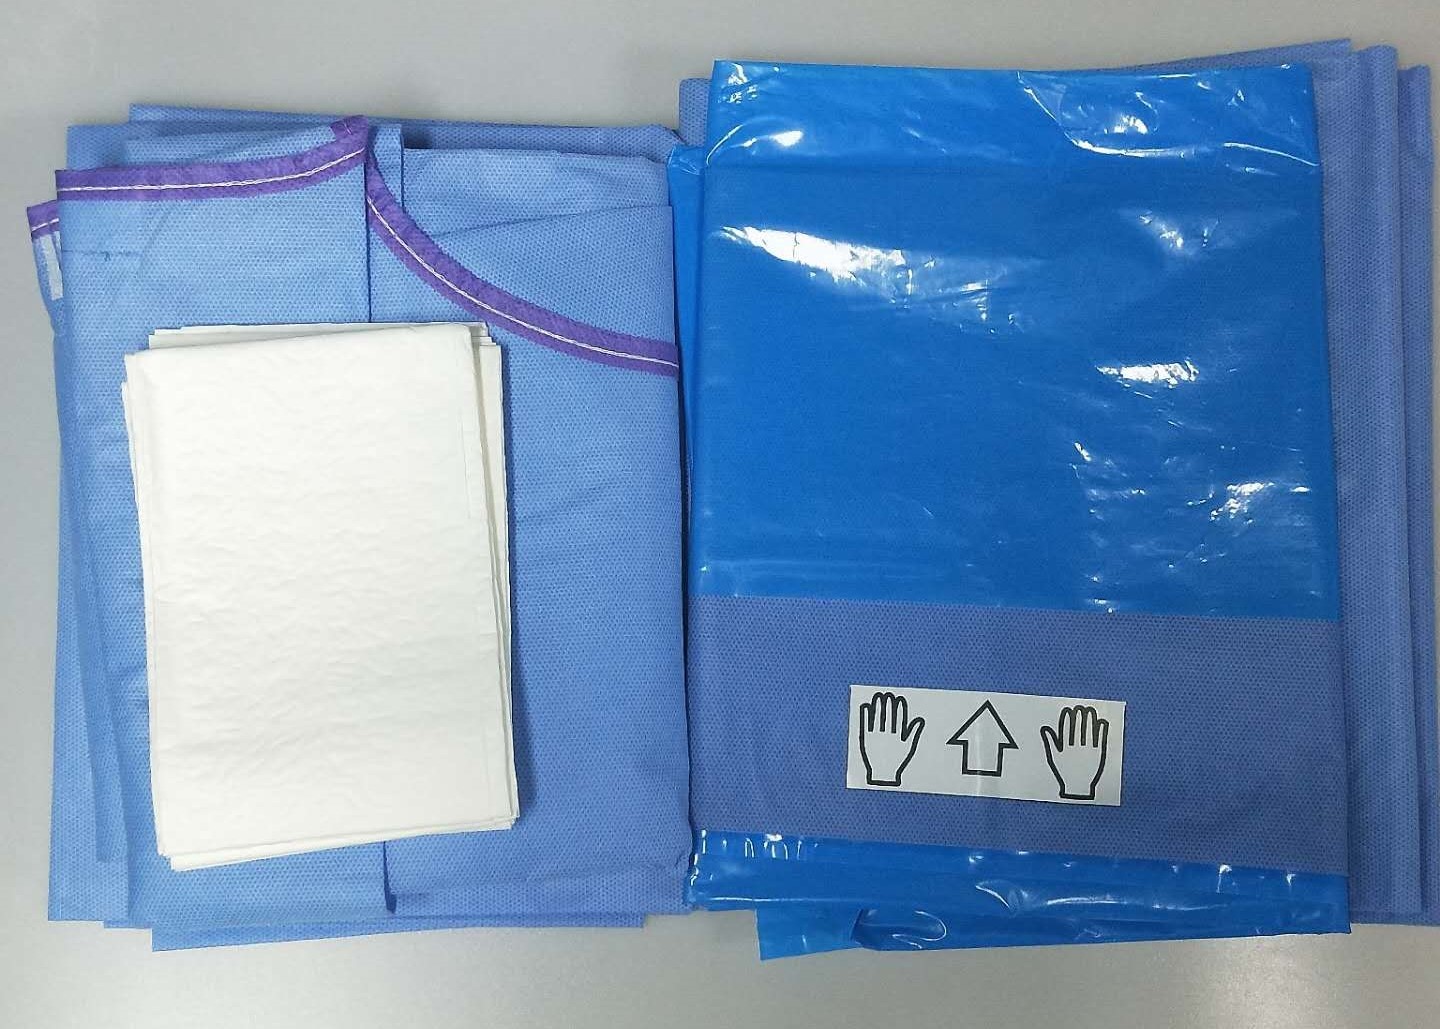  Sterile Surgical Bag In Operating Room Birth Delivery Table Drape Included Manufactures